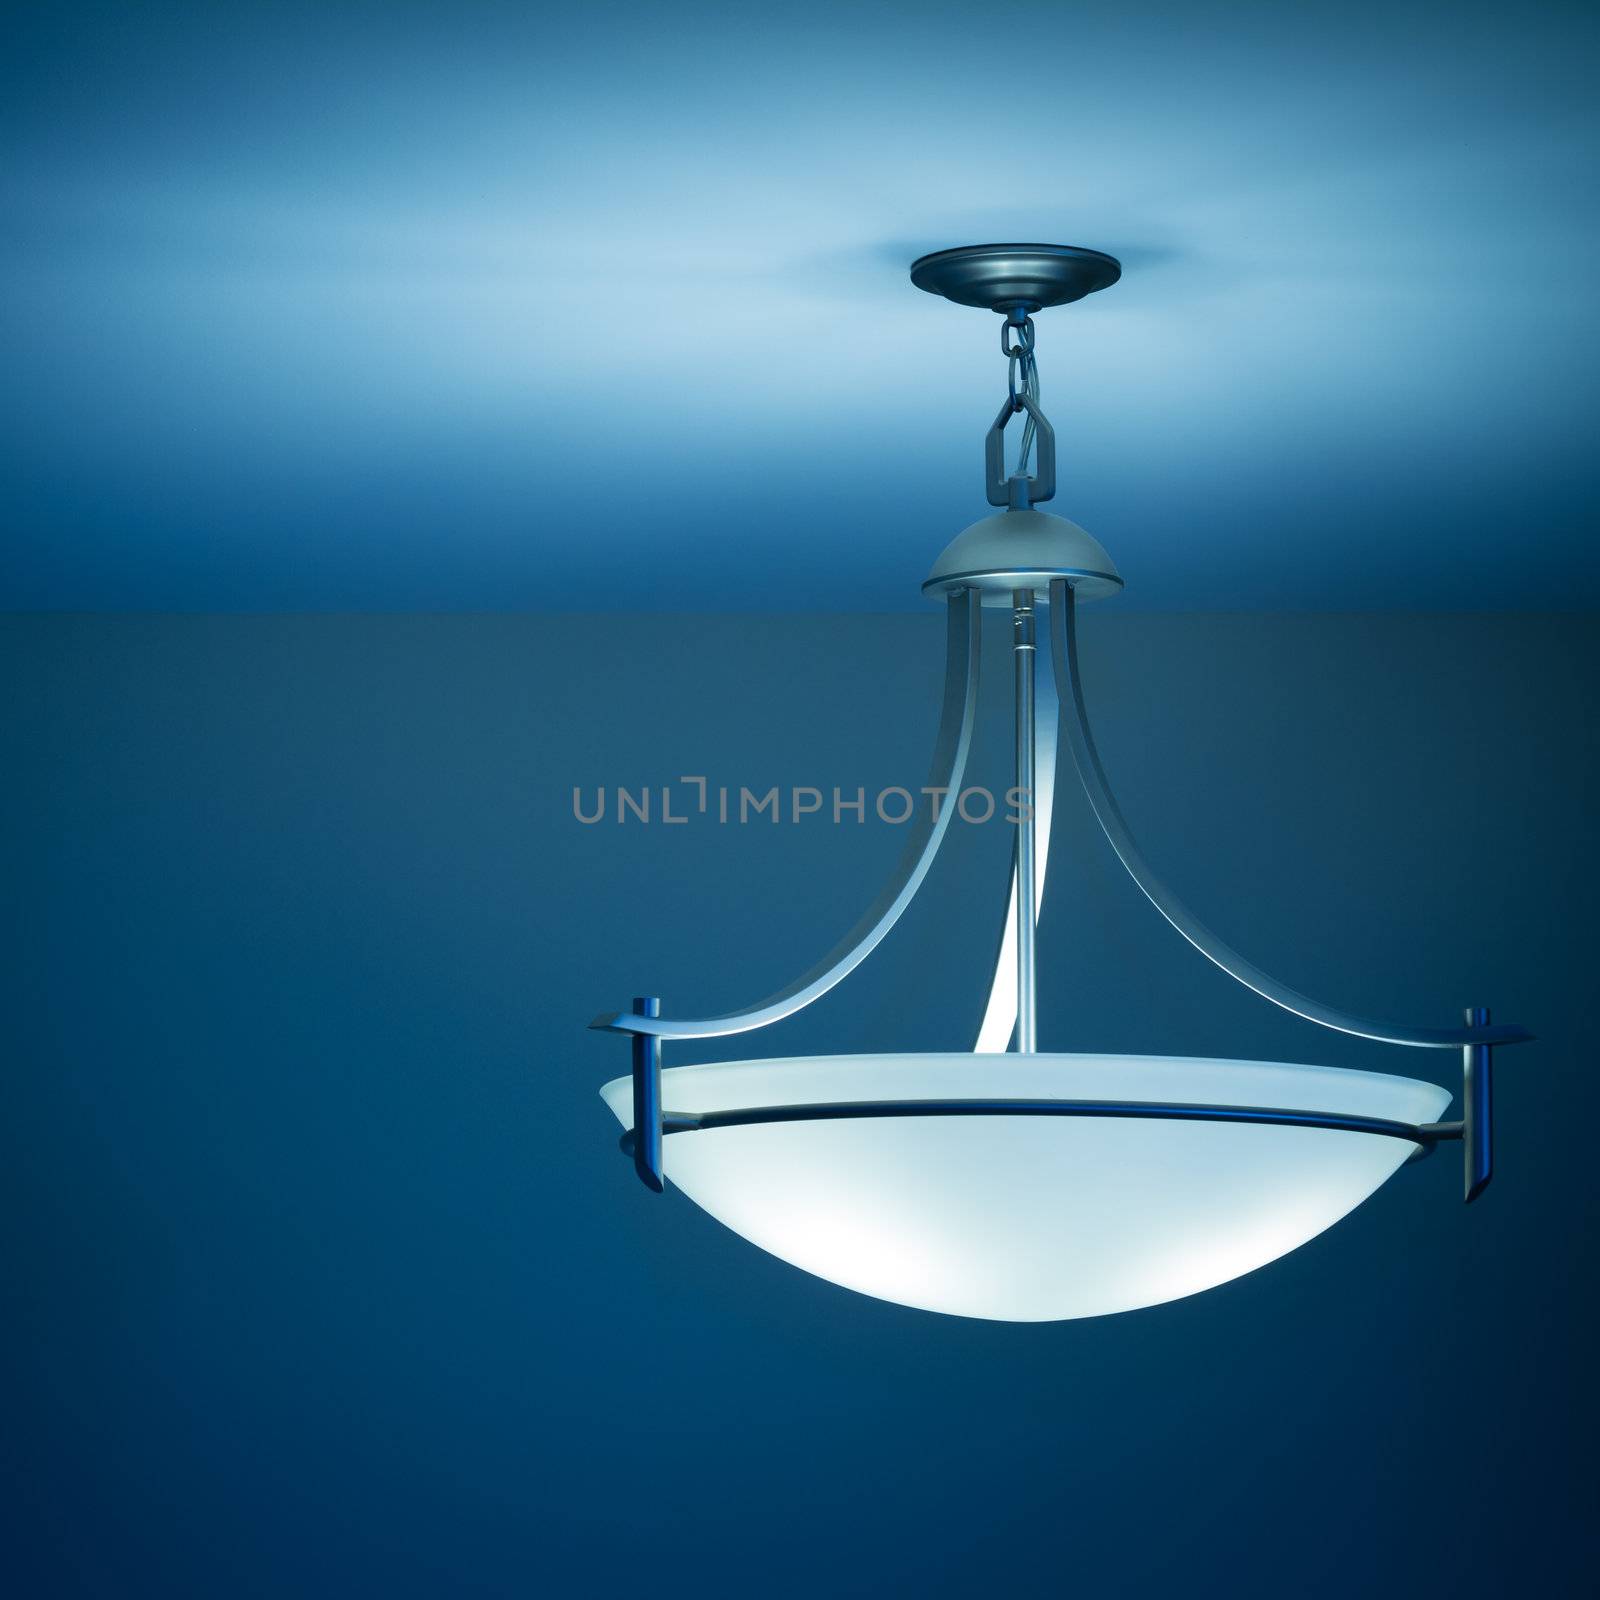 Ceiling lamp  by sergey02